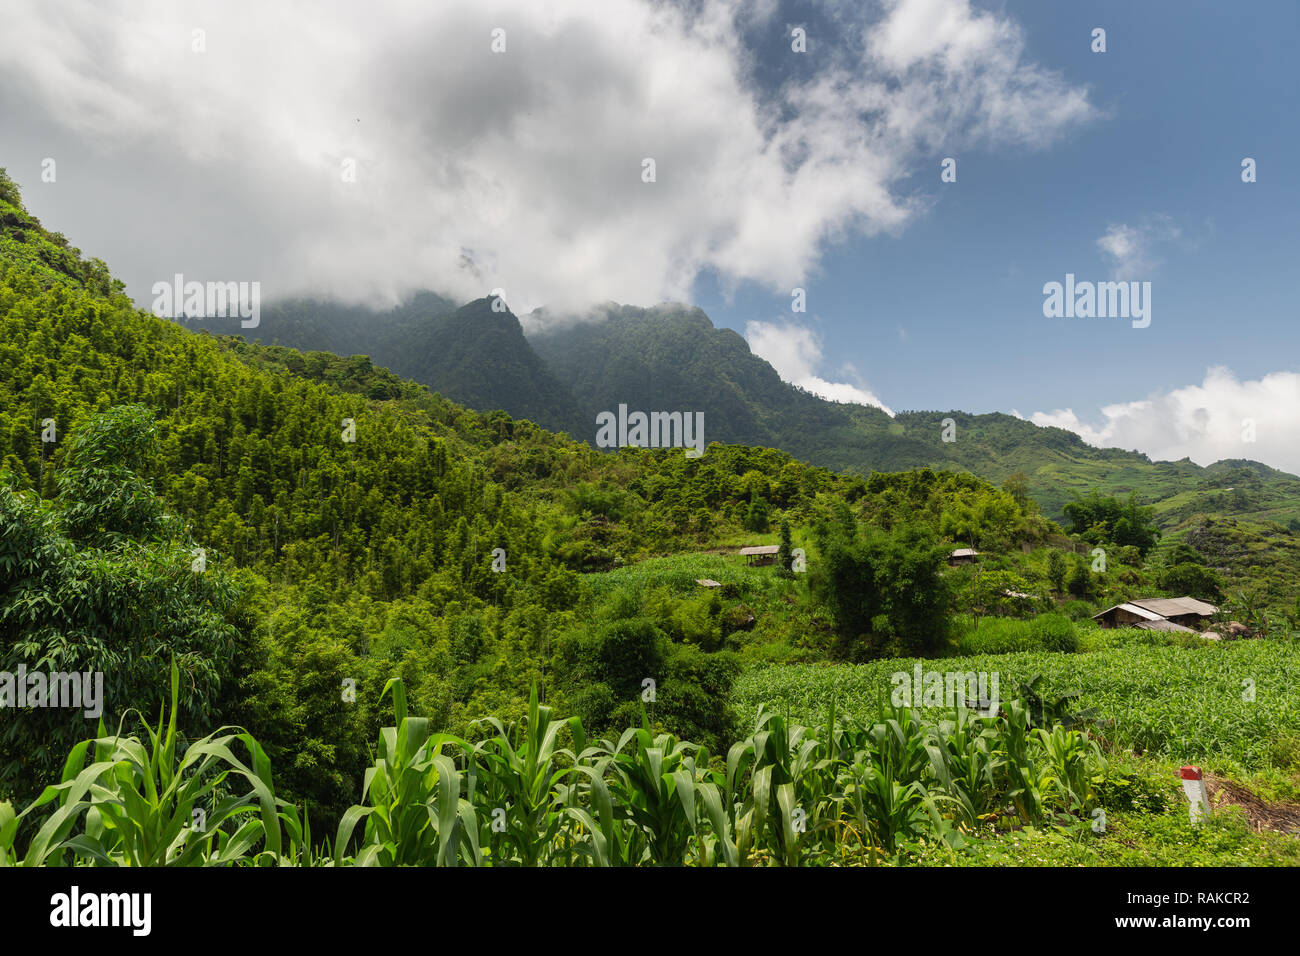 Lush corn field and farm house in Vietnamese mountains, Ha Giang Loop, Ha Giang Province, Vietnam, Asia Stock Photo